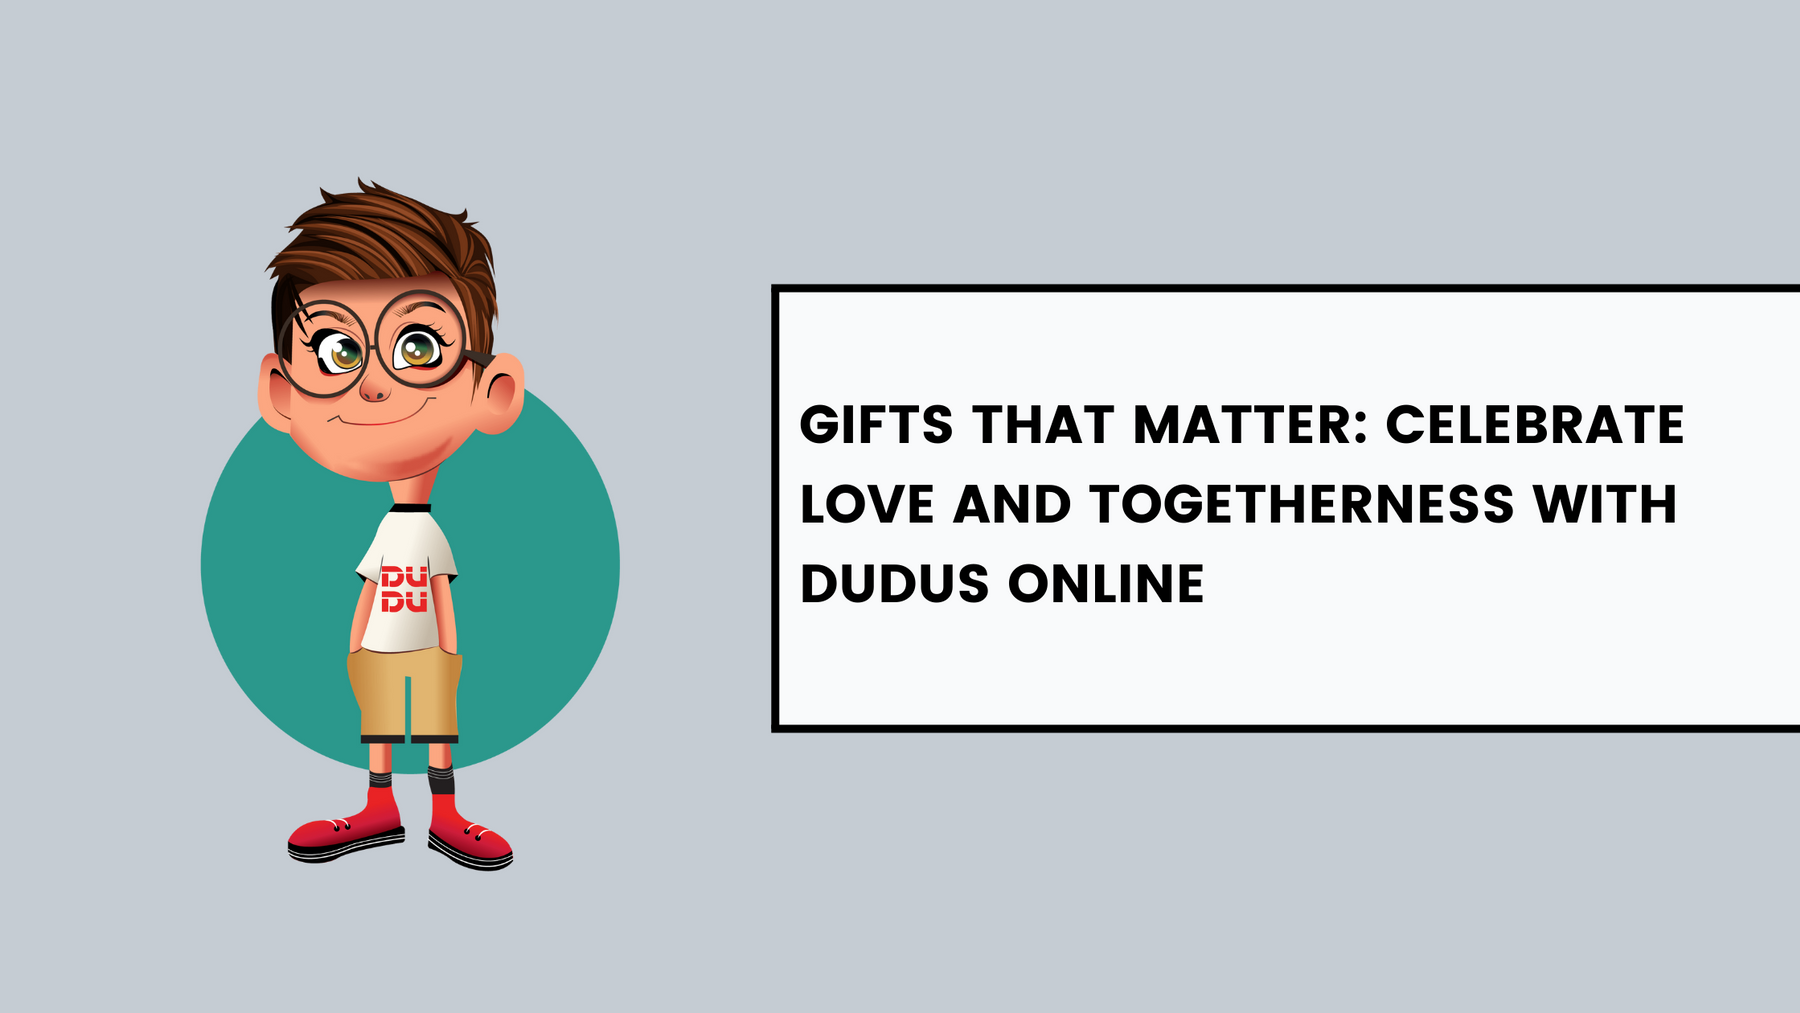 Gifts That Matter: Celebrate Love And Togetherness With Dudus Online